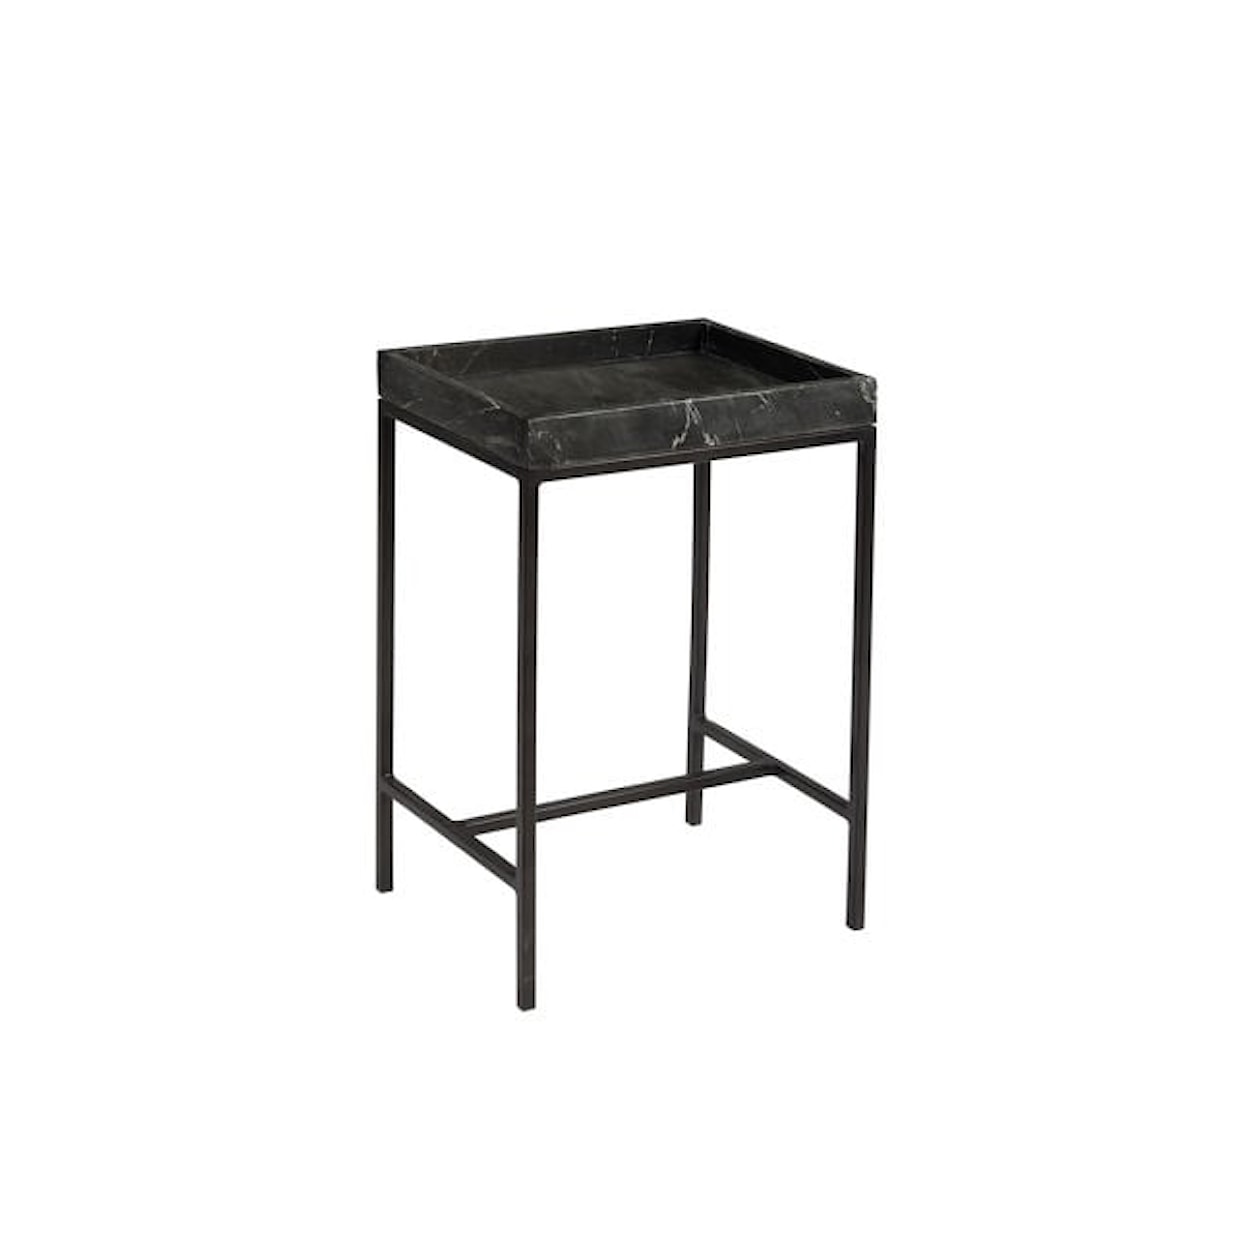 Dovetail Furniture Casegood Accent Vargo Side Table